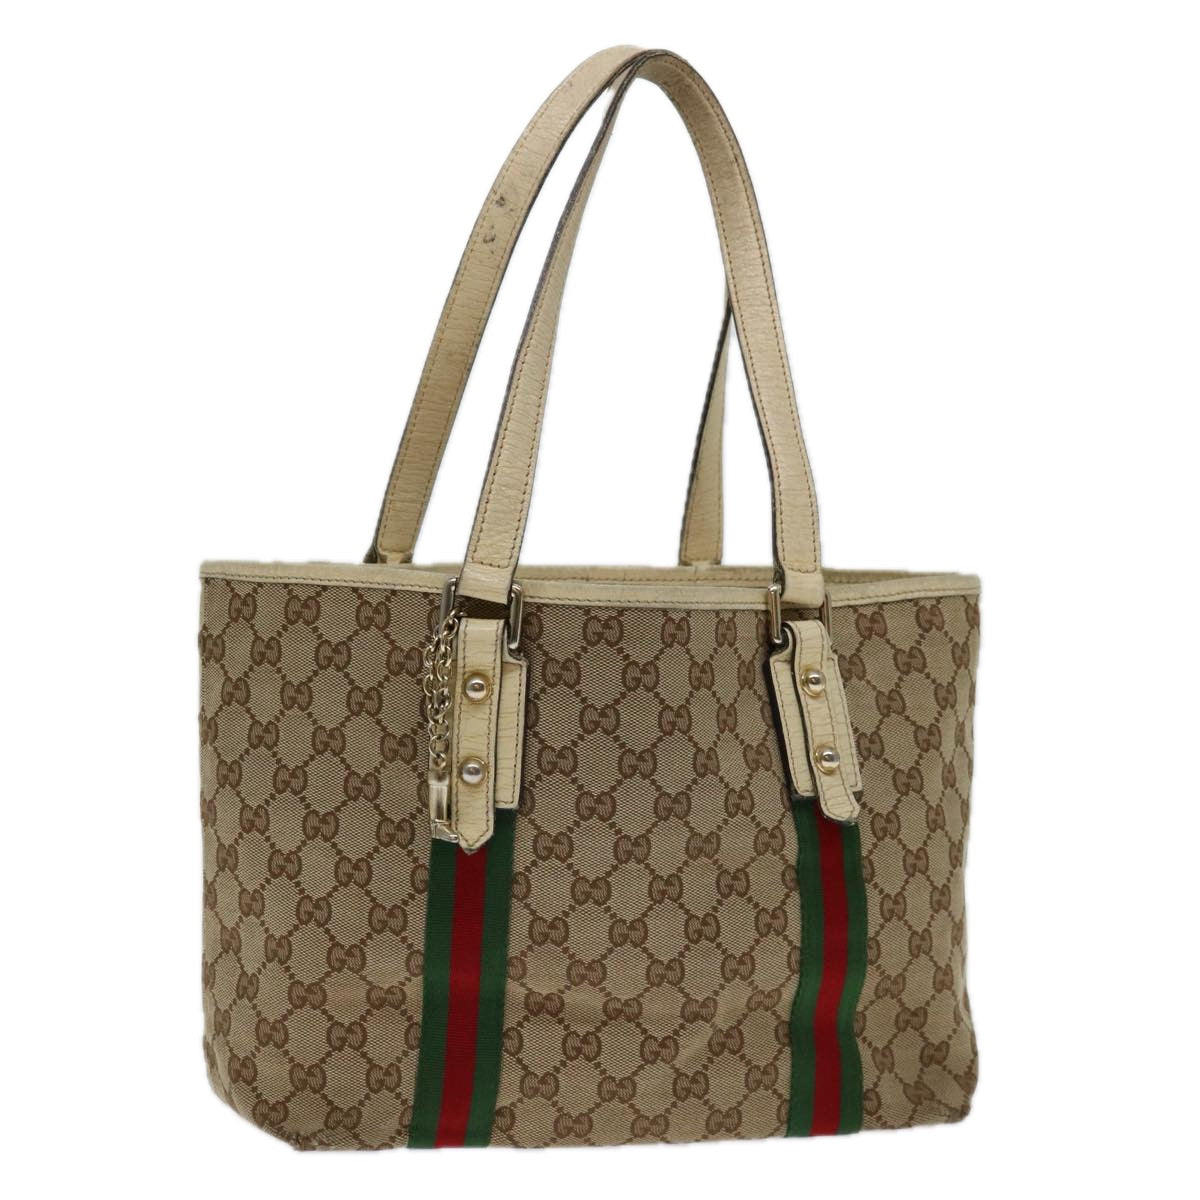 GUCCI GG Canvas Web Sherry Line Tote Bag Beige Red Green 137396 Auth 69642